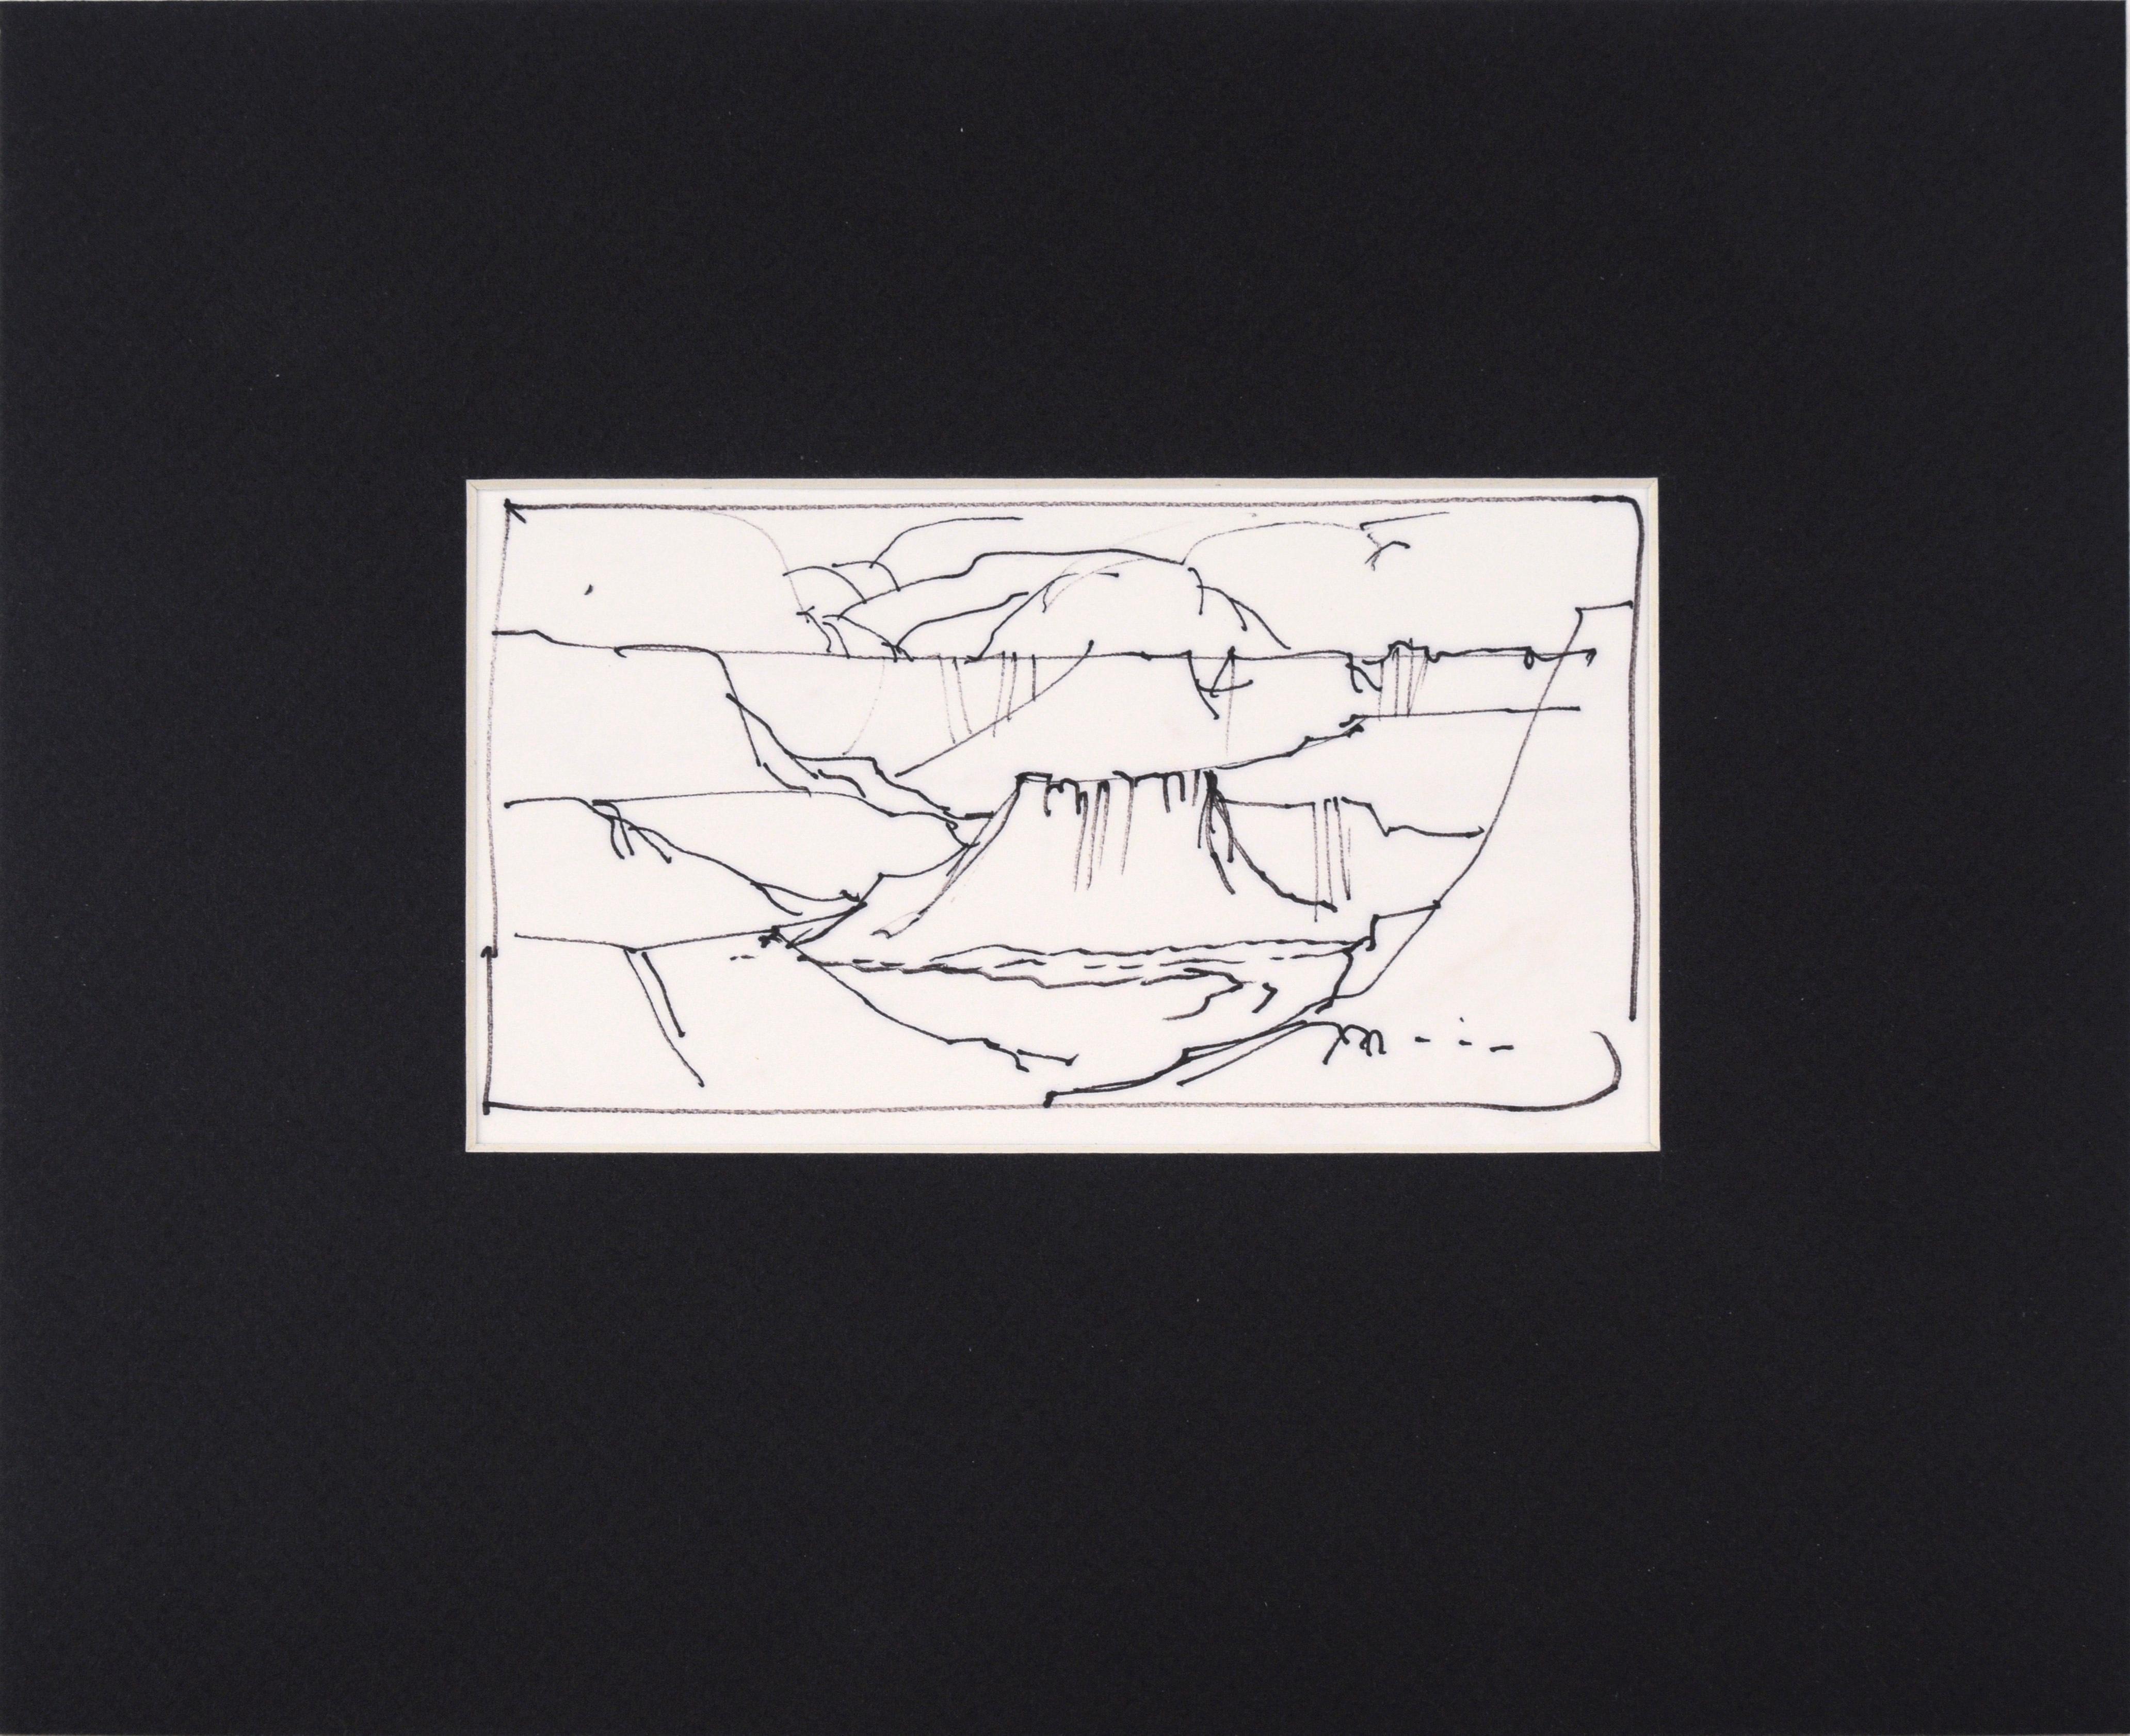 Laurence Sisson Landscape Art - Grand Canyon Plateau - Line Drawing Landscape in Ink on Paper